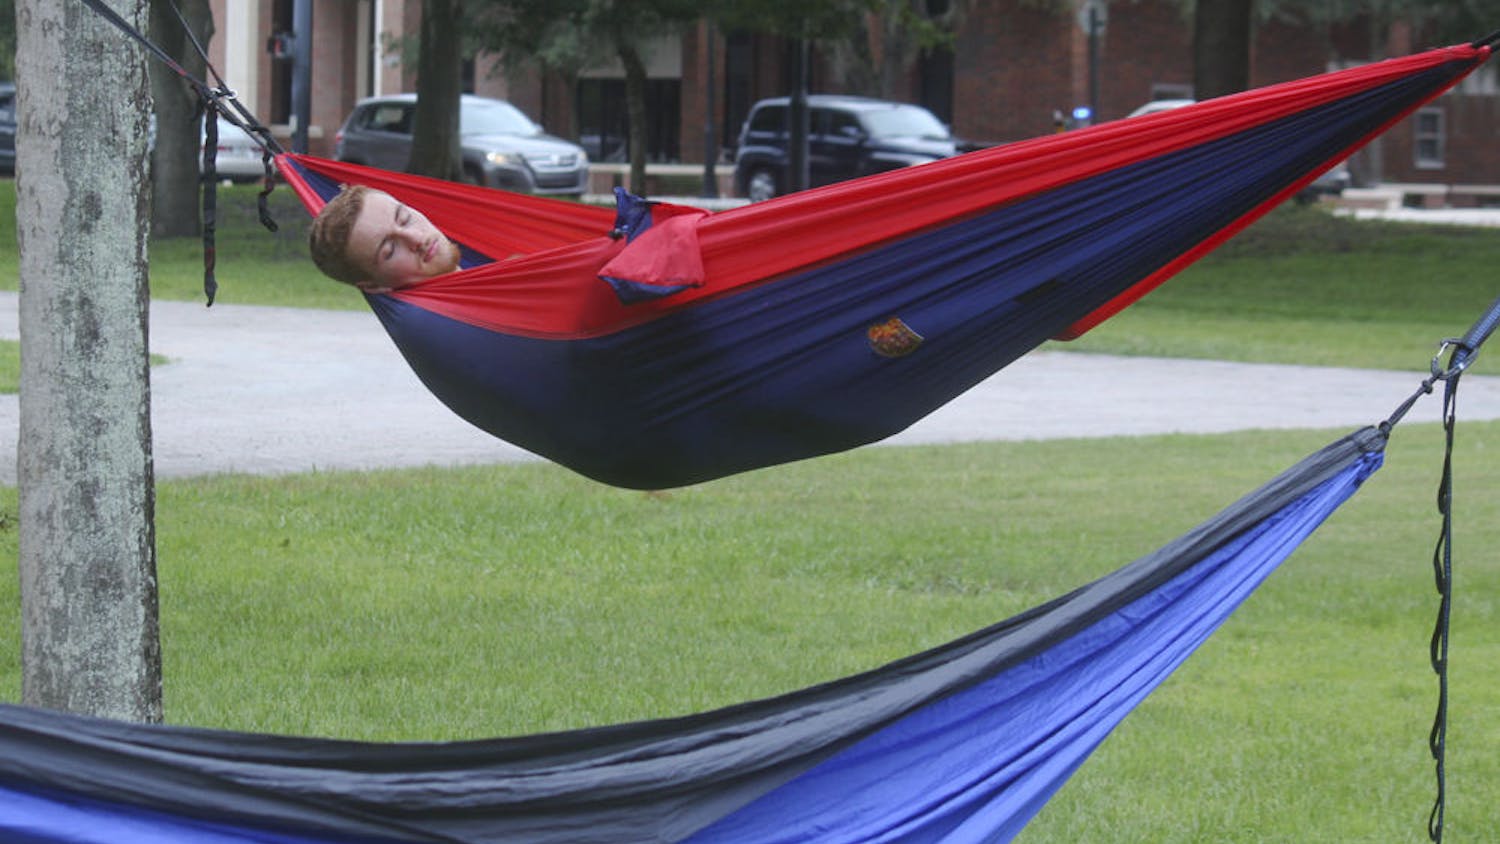 SLEEPING BEAUTY -- Charlie Le Grand, an 18-year-old UF biology major, naps at one of the hammocks during the third annual Trunks and Trashcans event on Saturday. Hosted by the UF Hammock club, the event was filled with hammocks, slacklines and Frisbees.